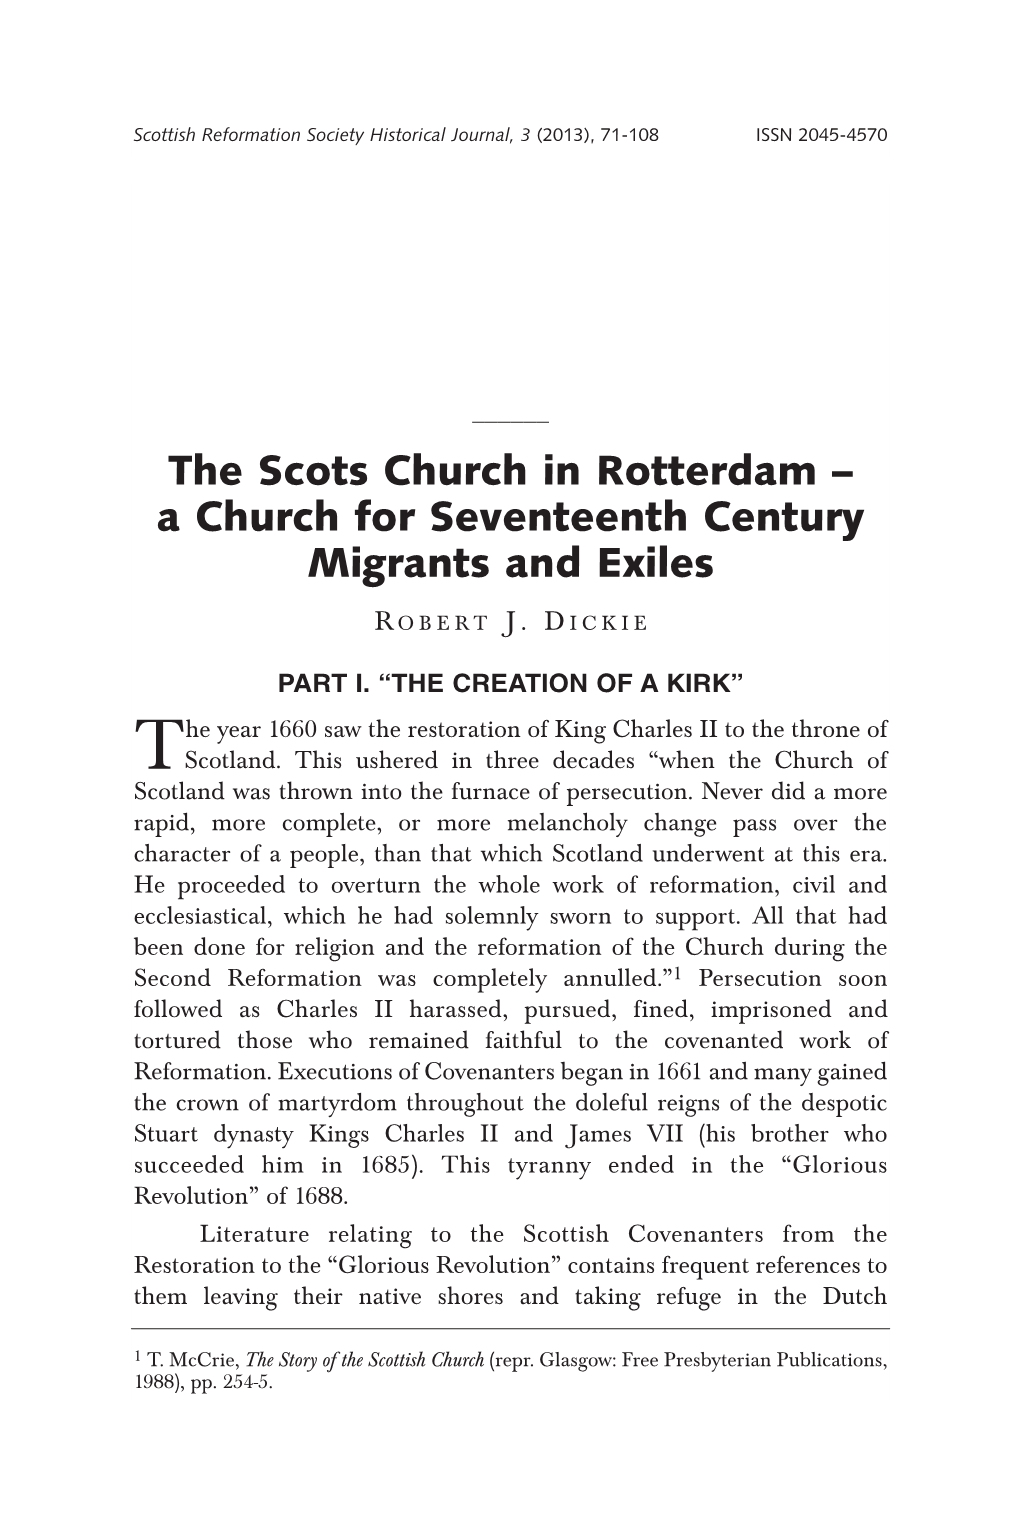 The Scots Church in Rotterdam – a Church for Seventeenth Century Migrants and Exiles